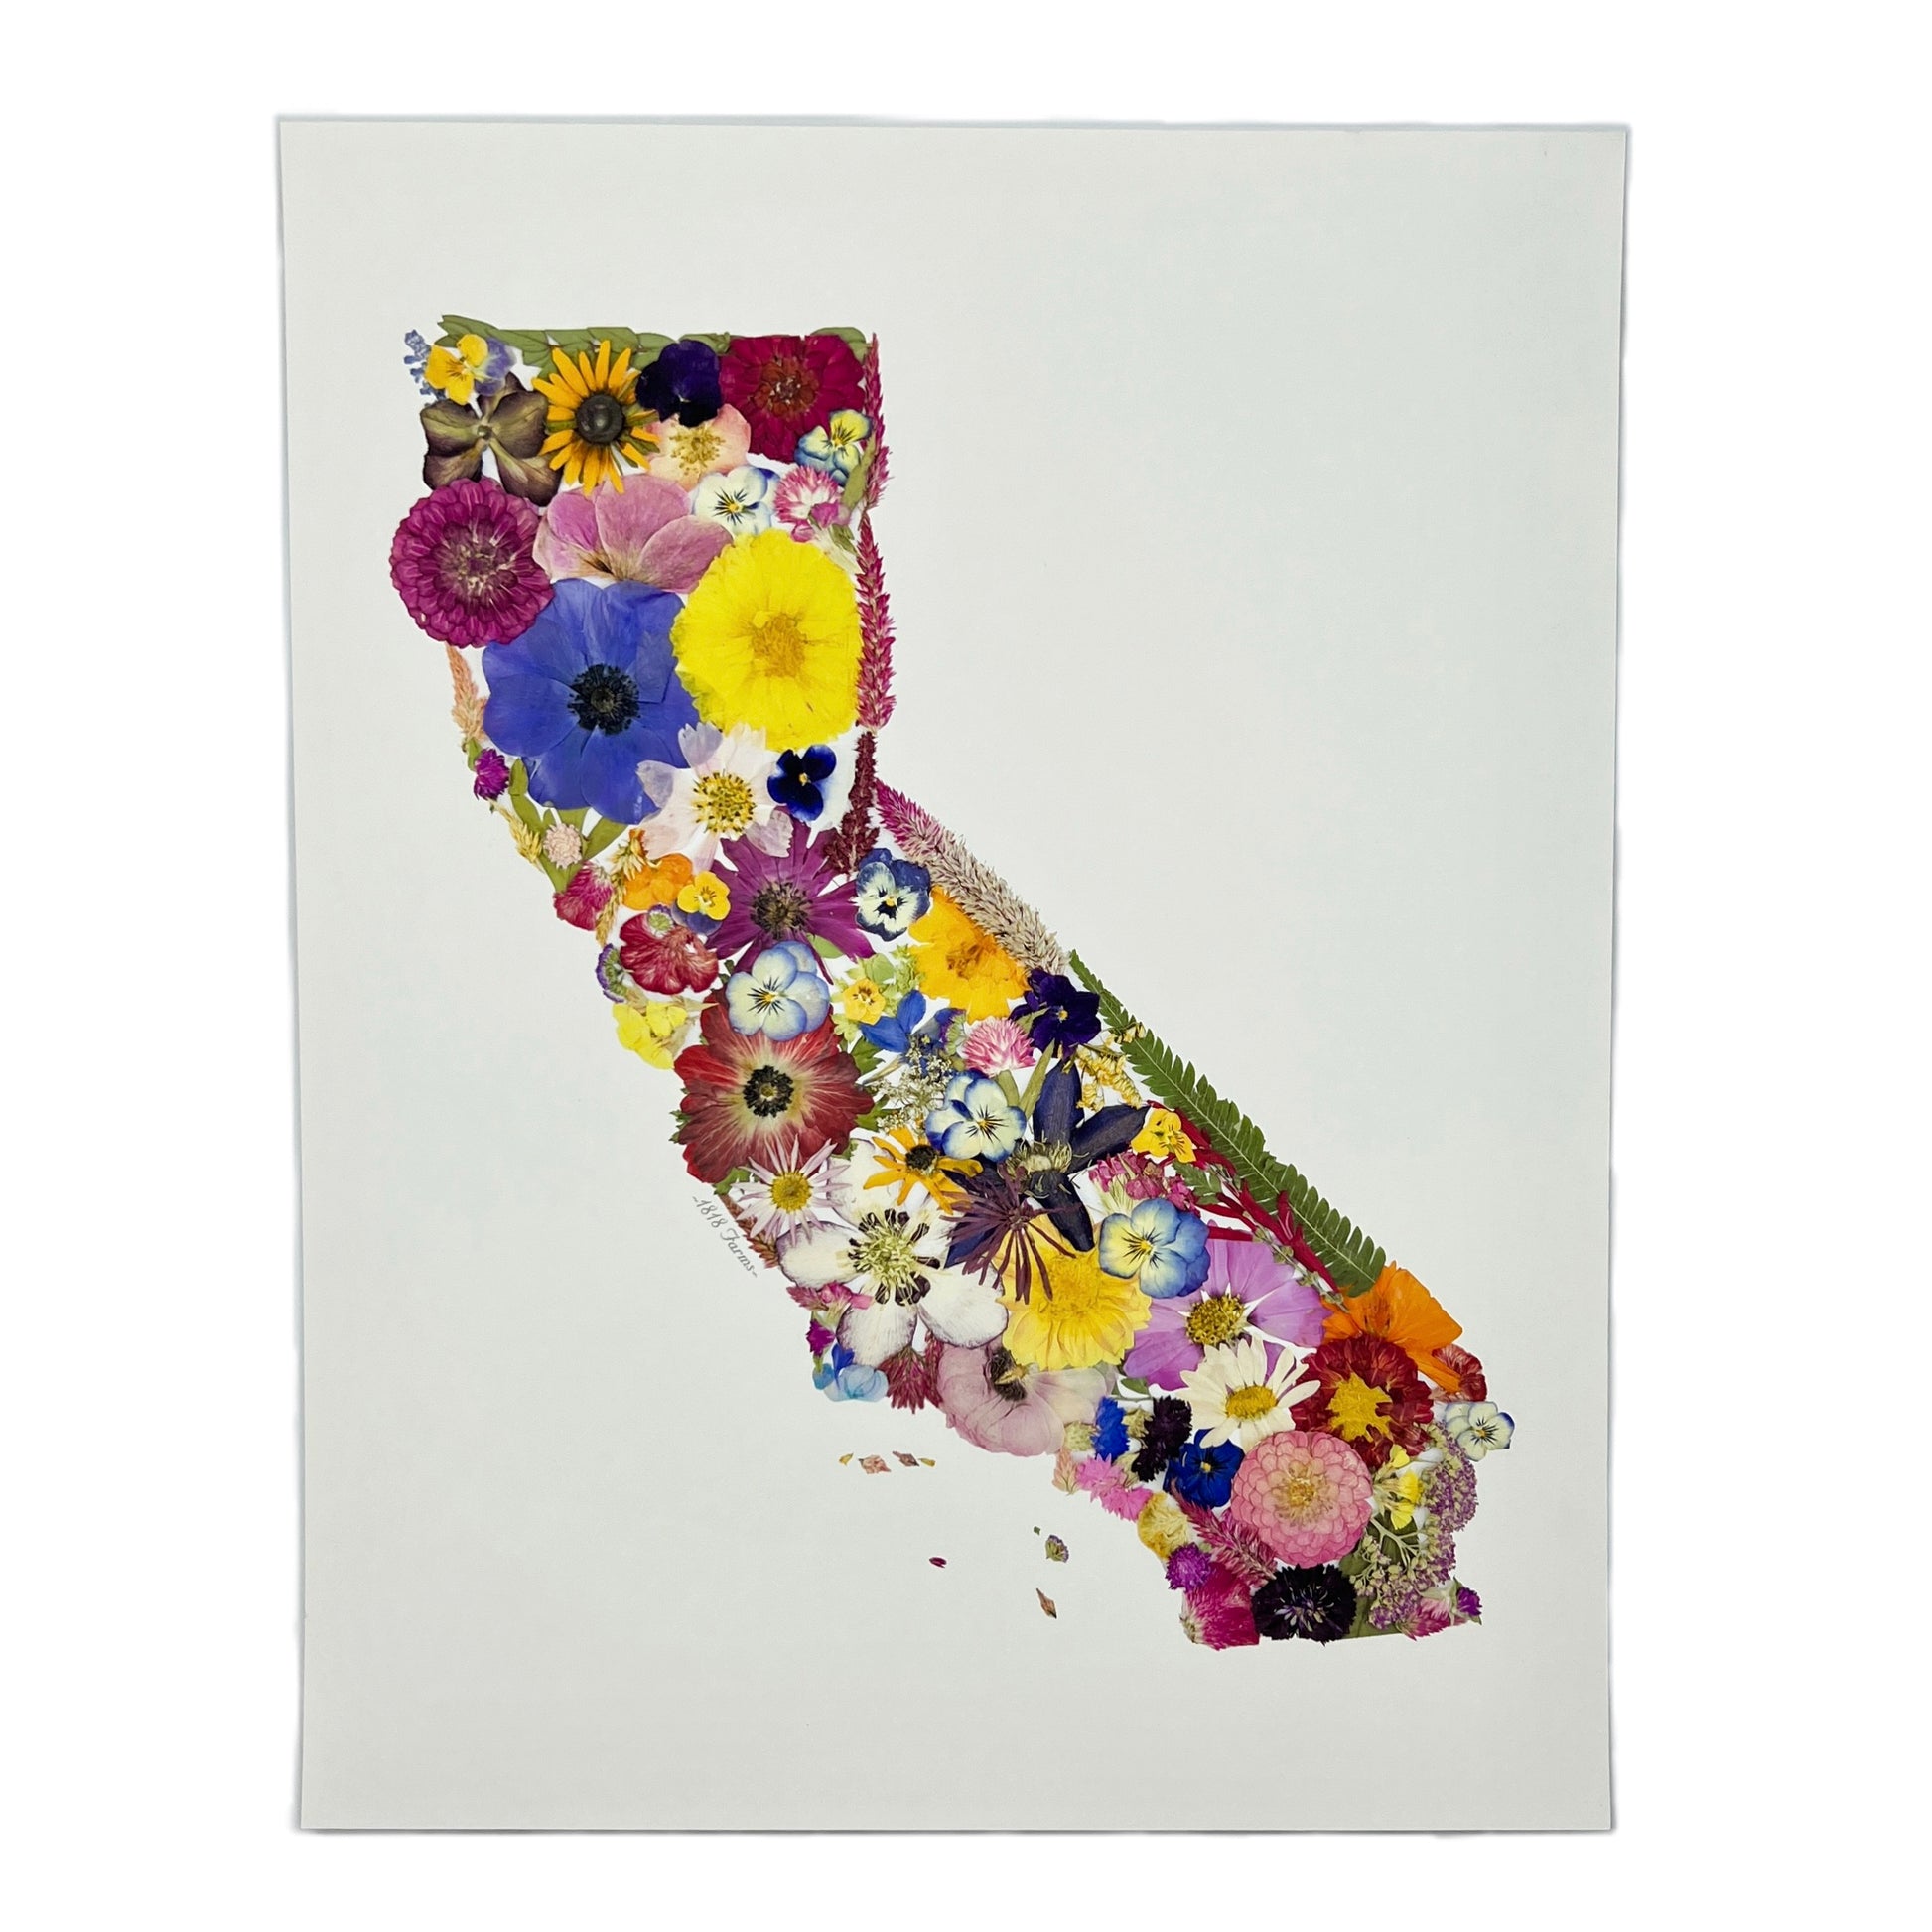 State Themed Giclée Print  - "Where I Bloom" Collection Giclee Art Print 1818 Farms 8"x10" California 